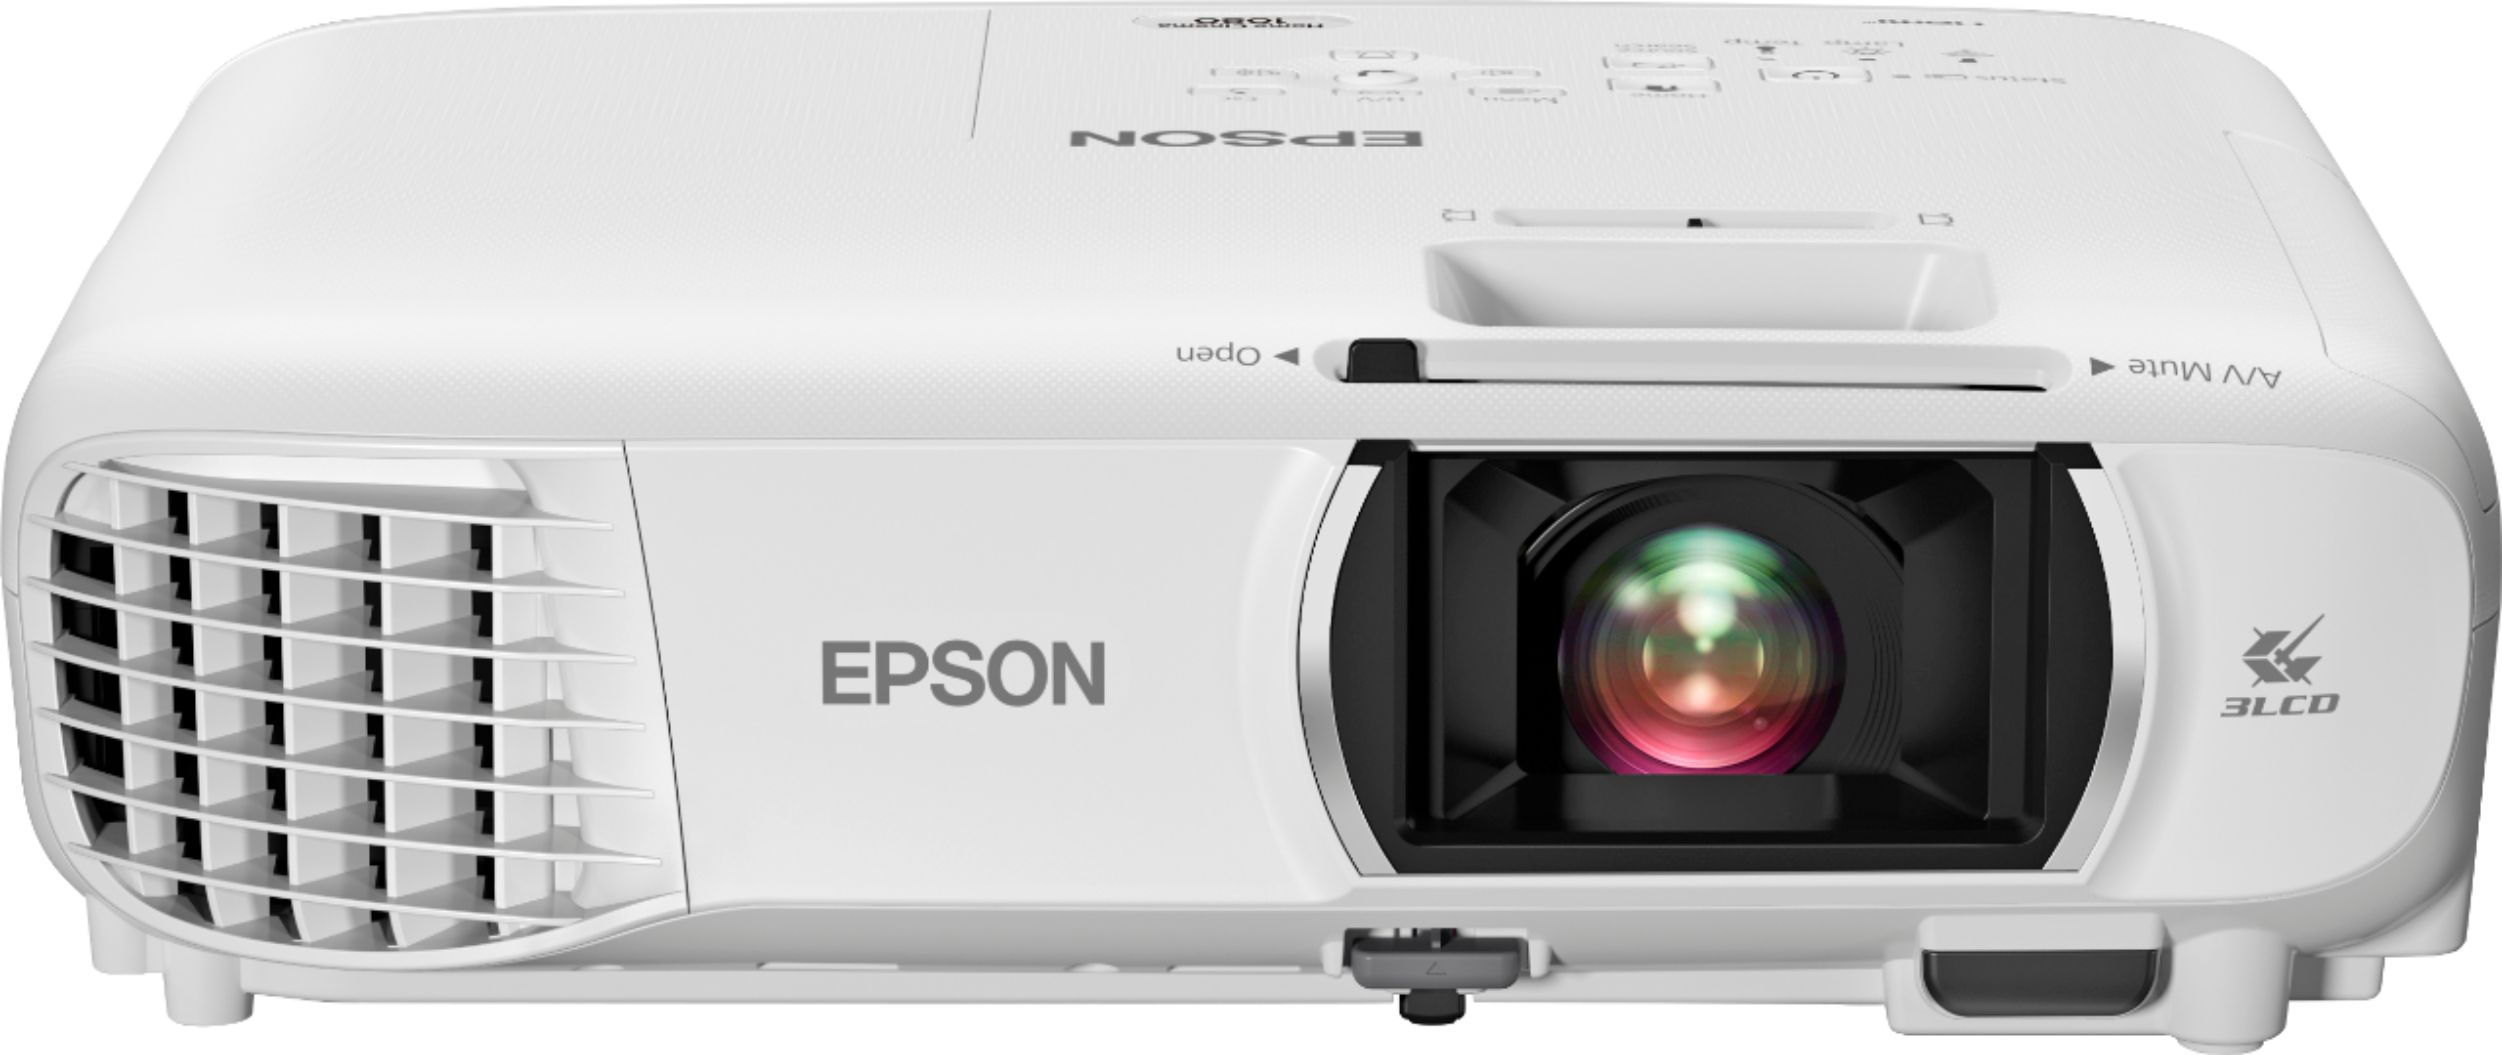 PC/タブレット PC周辺機器 Epson Home Cinema 1080 1080p 3LCD Projector, 3400 lumens, 2 HDMI White  V11H980020 - Best Buy